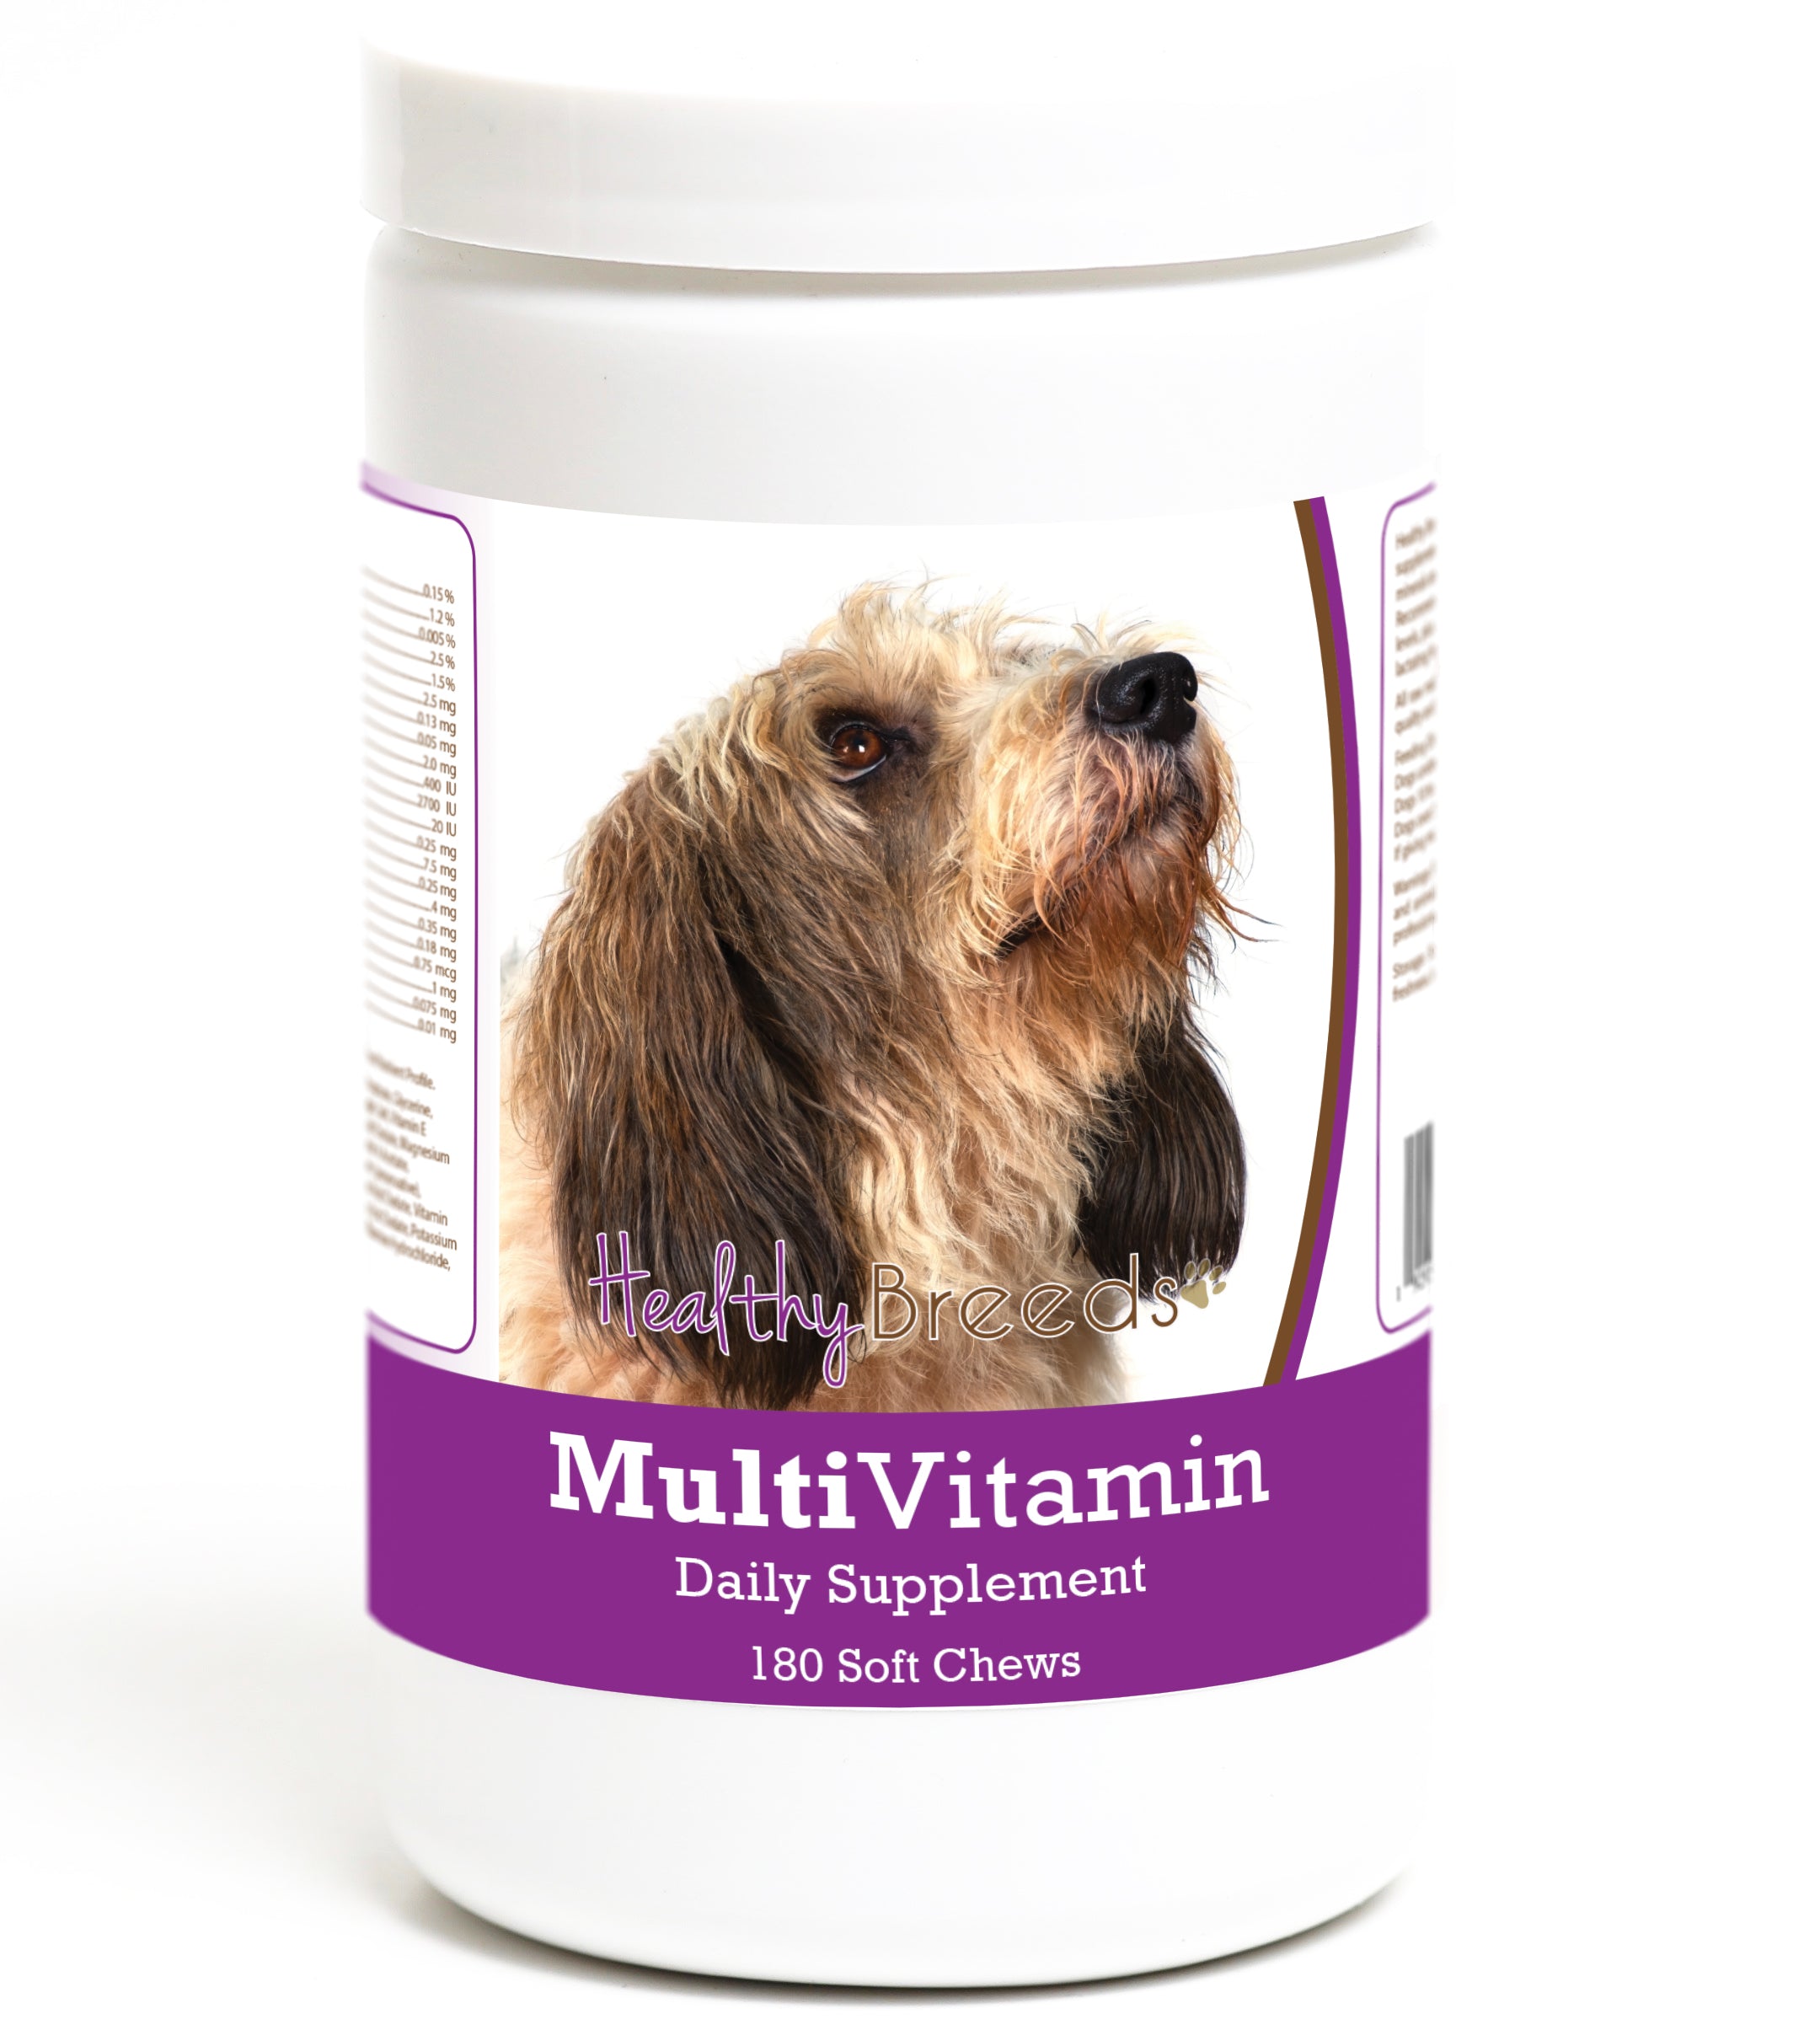 Petits Bassets Griffons Vendeen Multivitamin Soft Chew for Dogs 180 Count